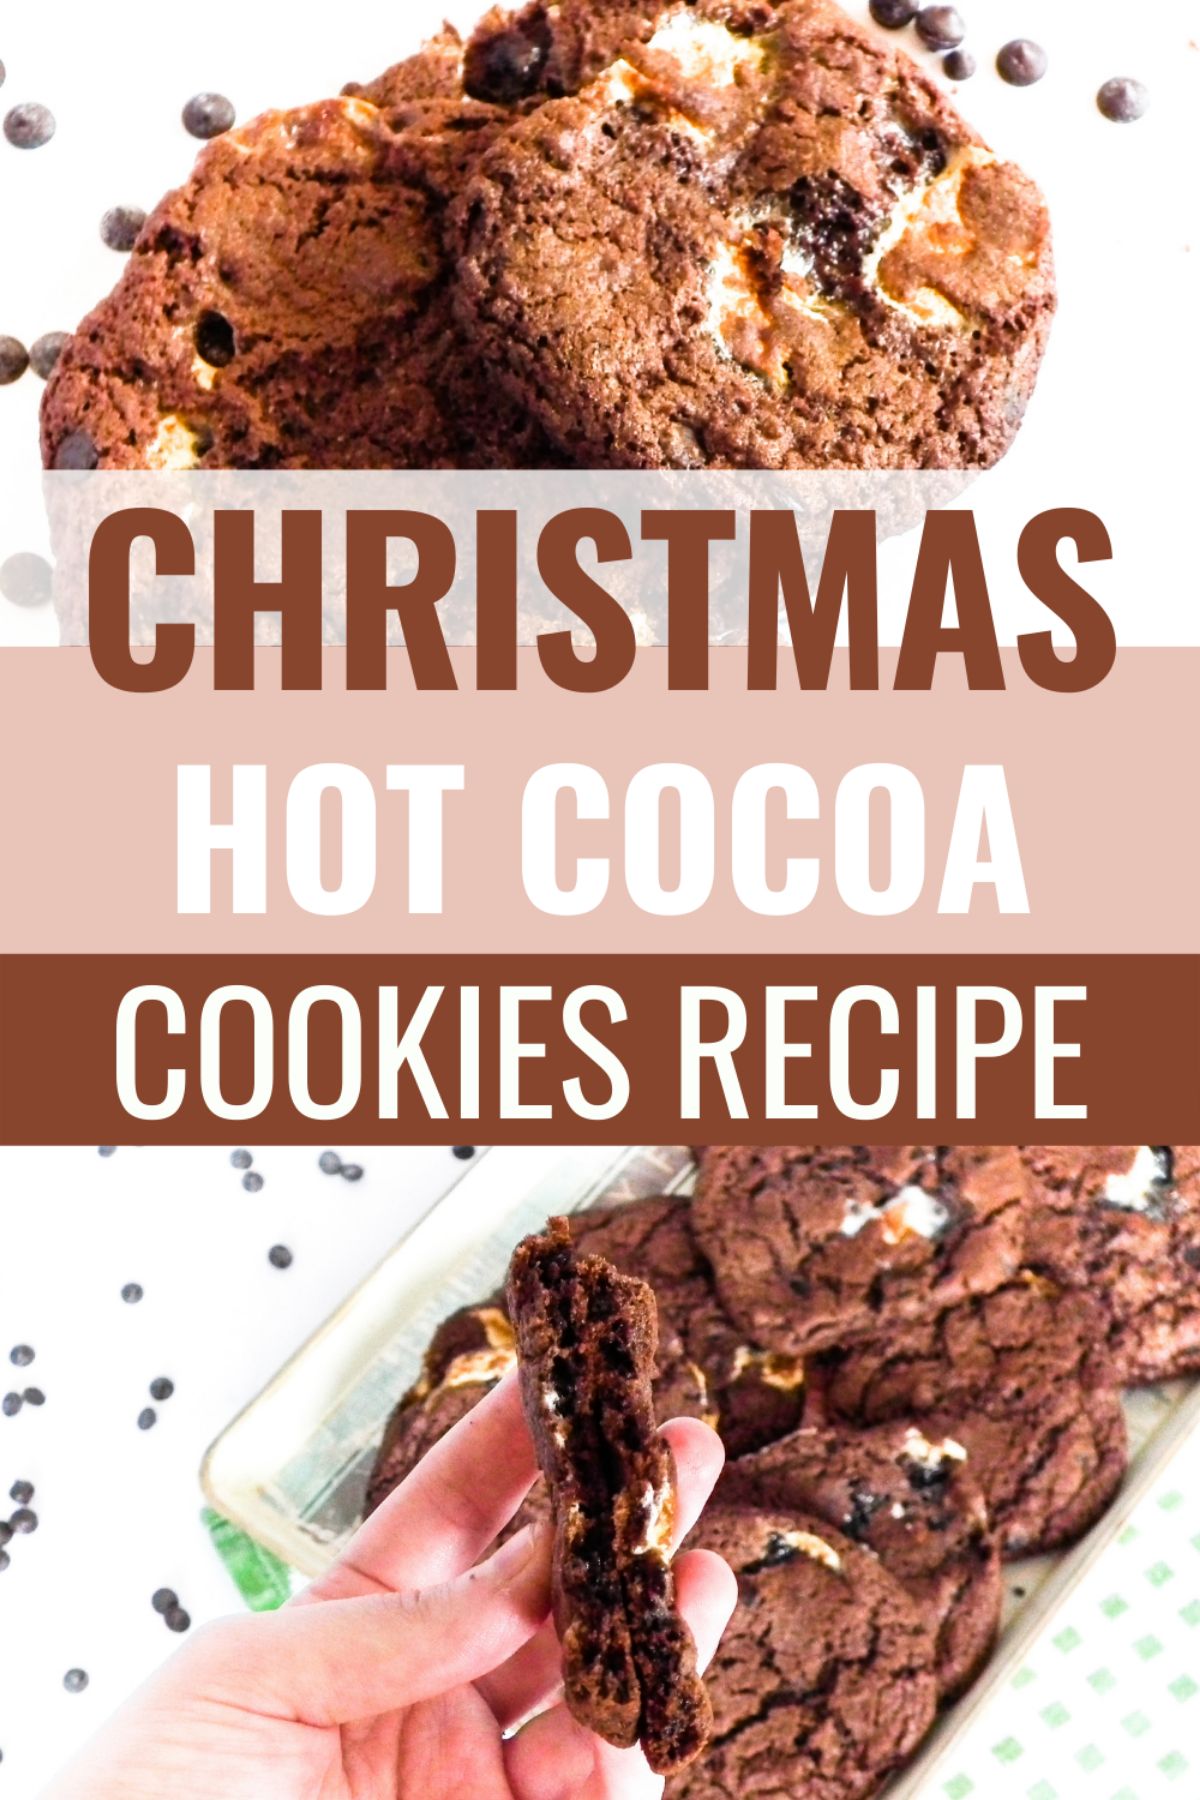 A collage of two images of Christmas Hot Cocoa Cookies with a text in the middle saying "Christmas Hot Cocoa Cookies Recipe"